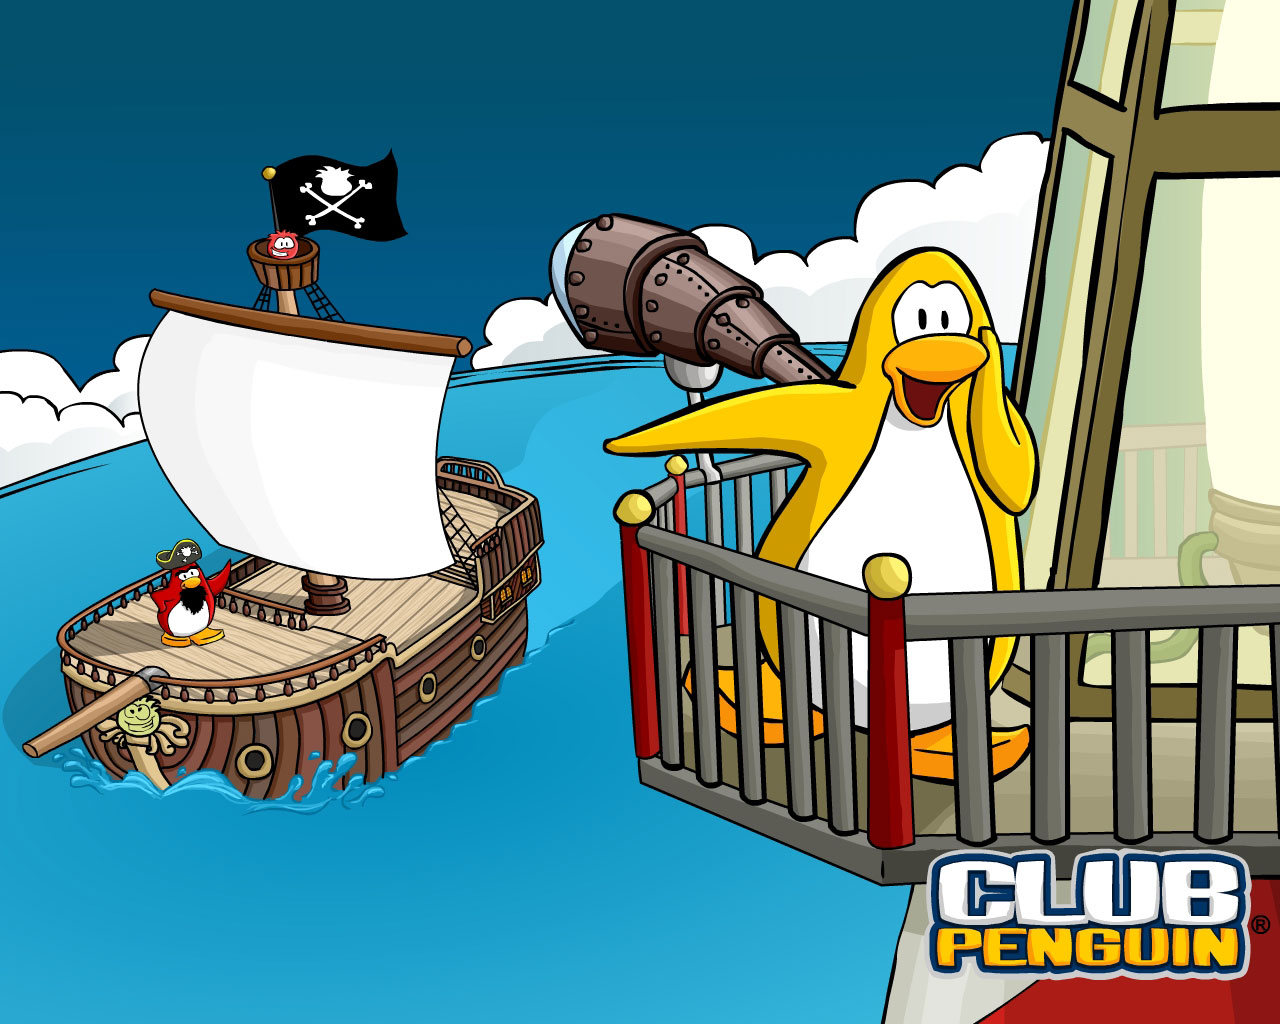 Wallpapers | Spyrom's Club Penguin cheats and tips